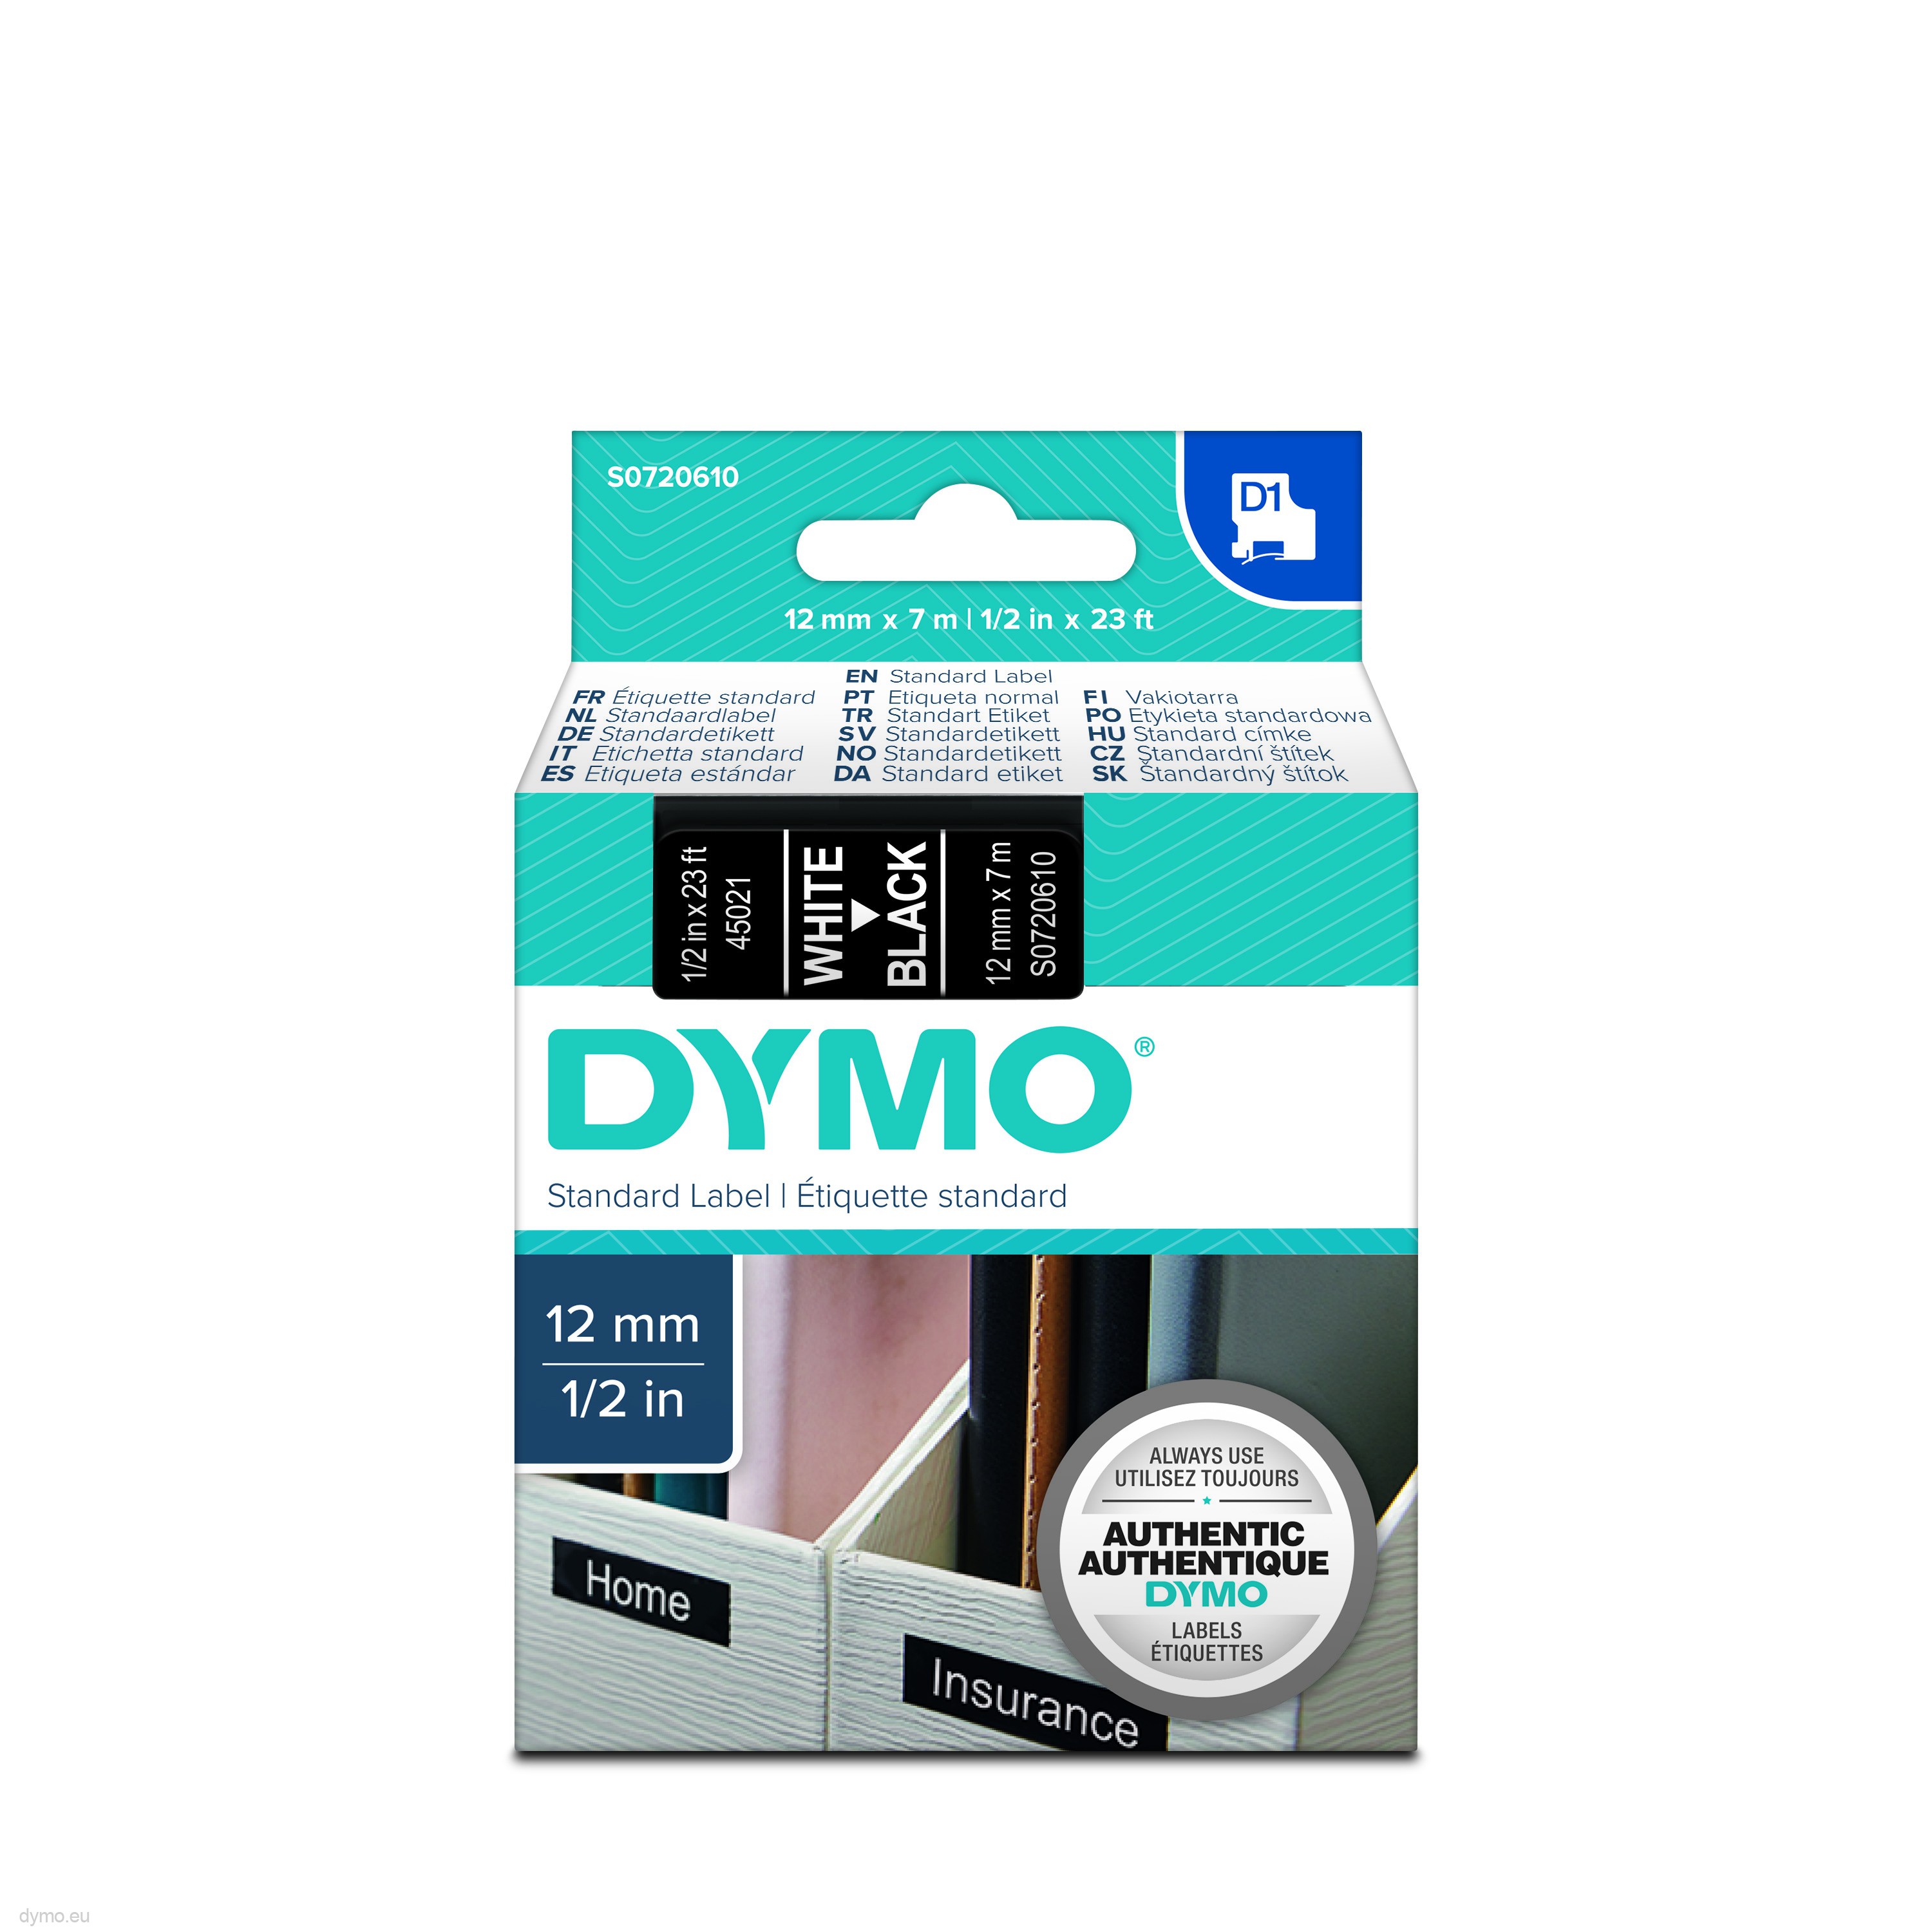 Dymo D1 Labels for Label Manager Printers Special Pack 2 Black Print on White 12 mm x 7 m 1 Rolls